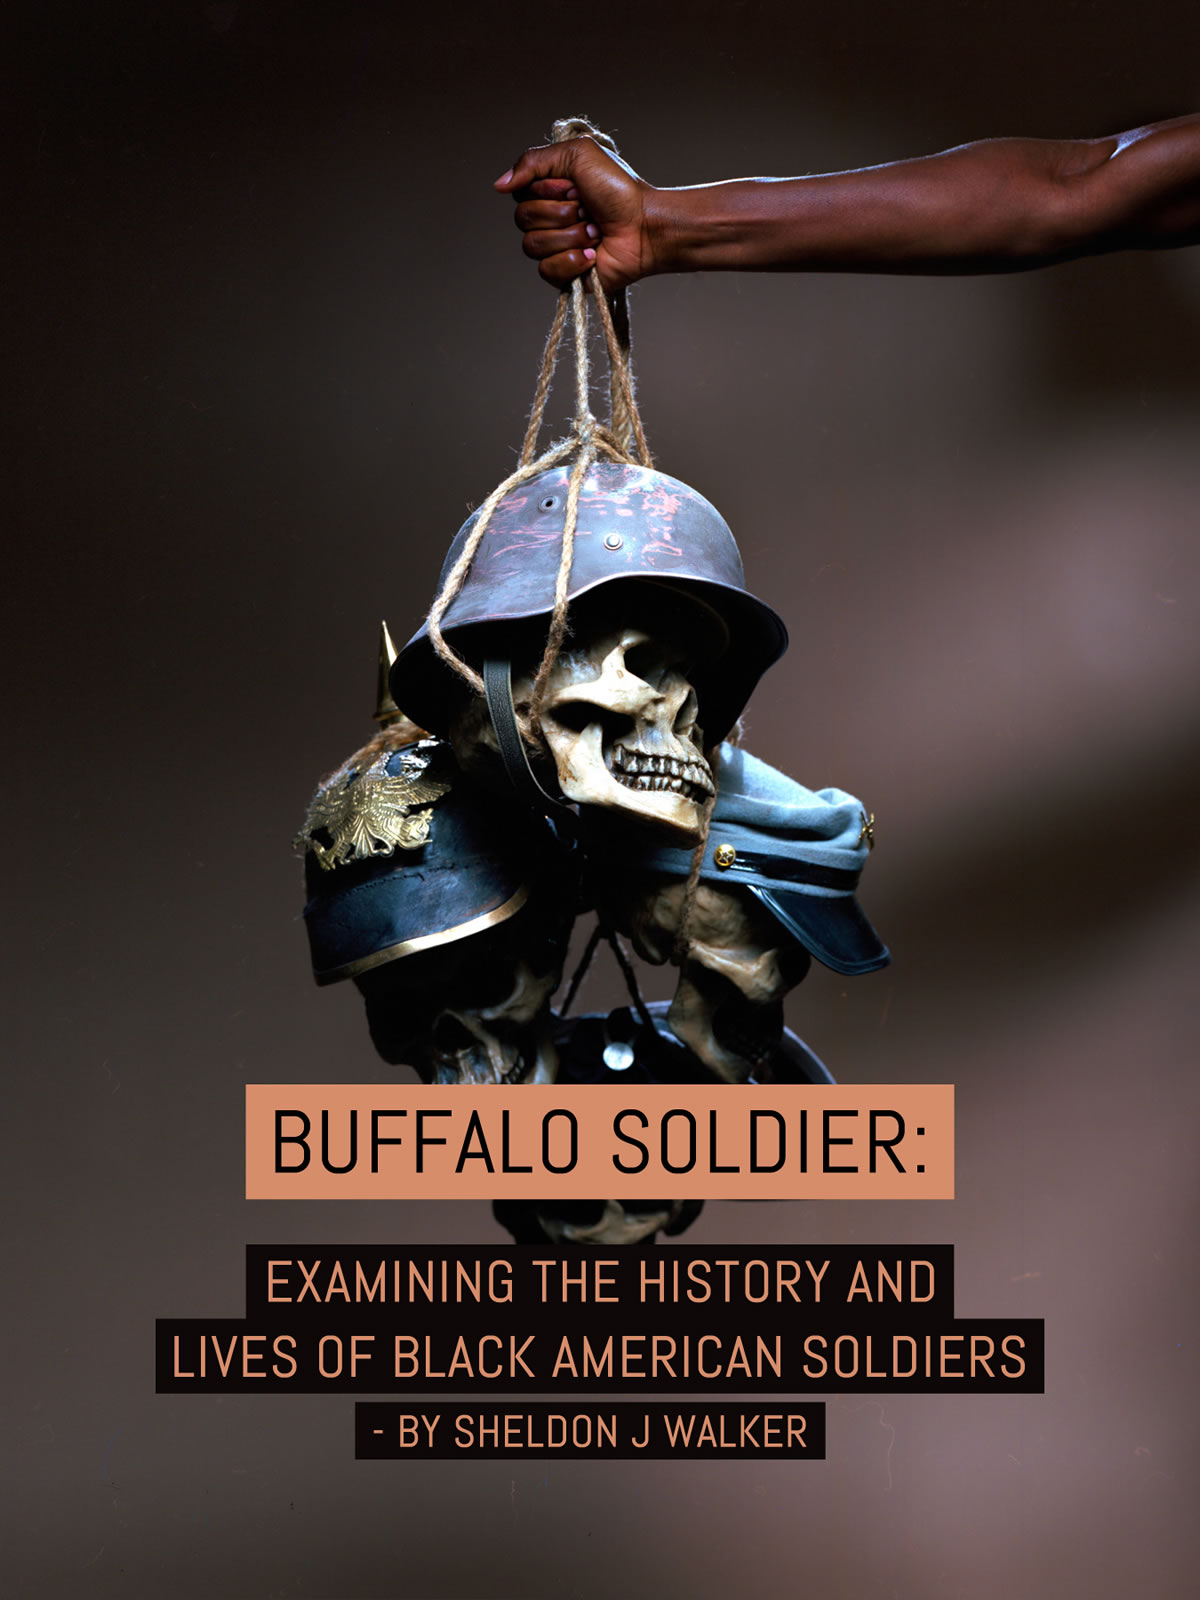 Buffalo Soldier: Examining the history and lives of black American soldiers